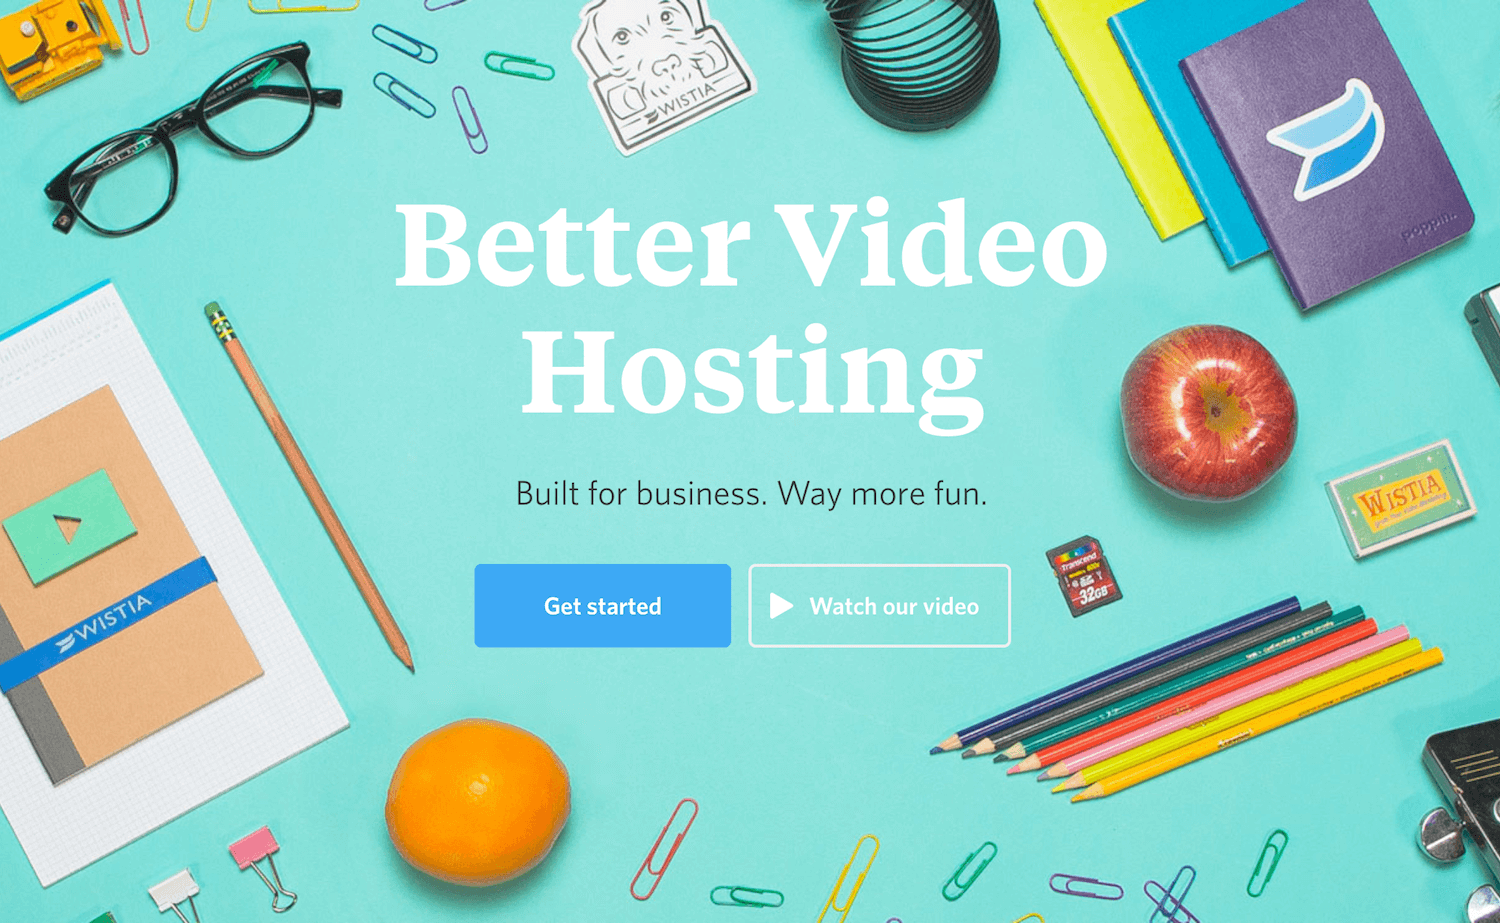 Don’t Have a Wistia Account Yet?